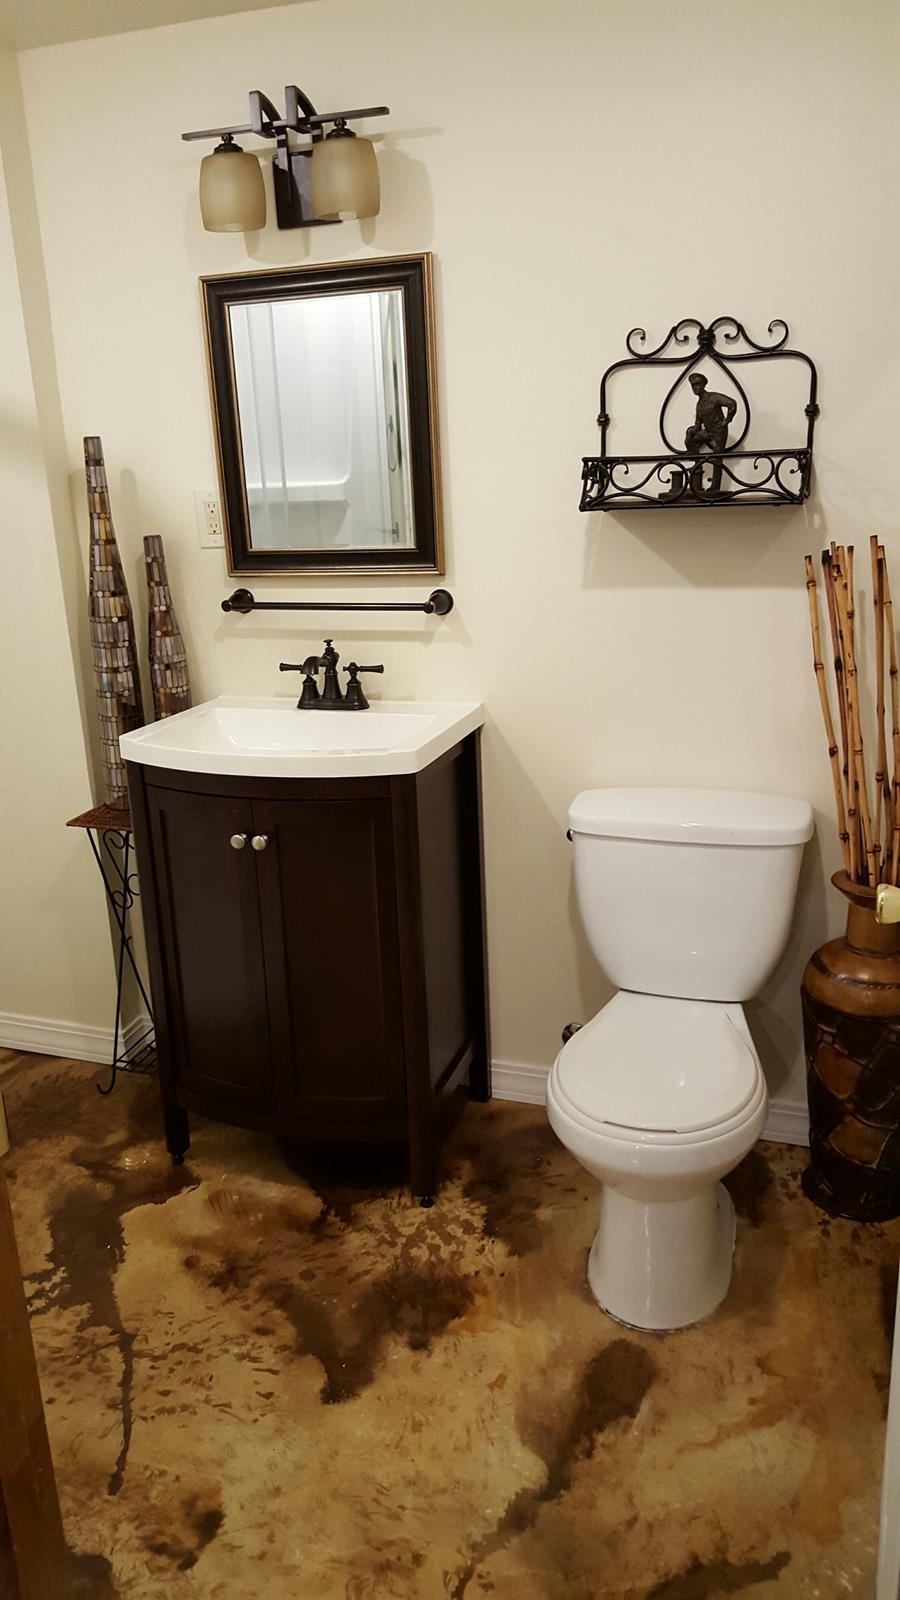 The beautiful, newly-stained bathroom floor is sealed with EasySeal satin for added protection and shine